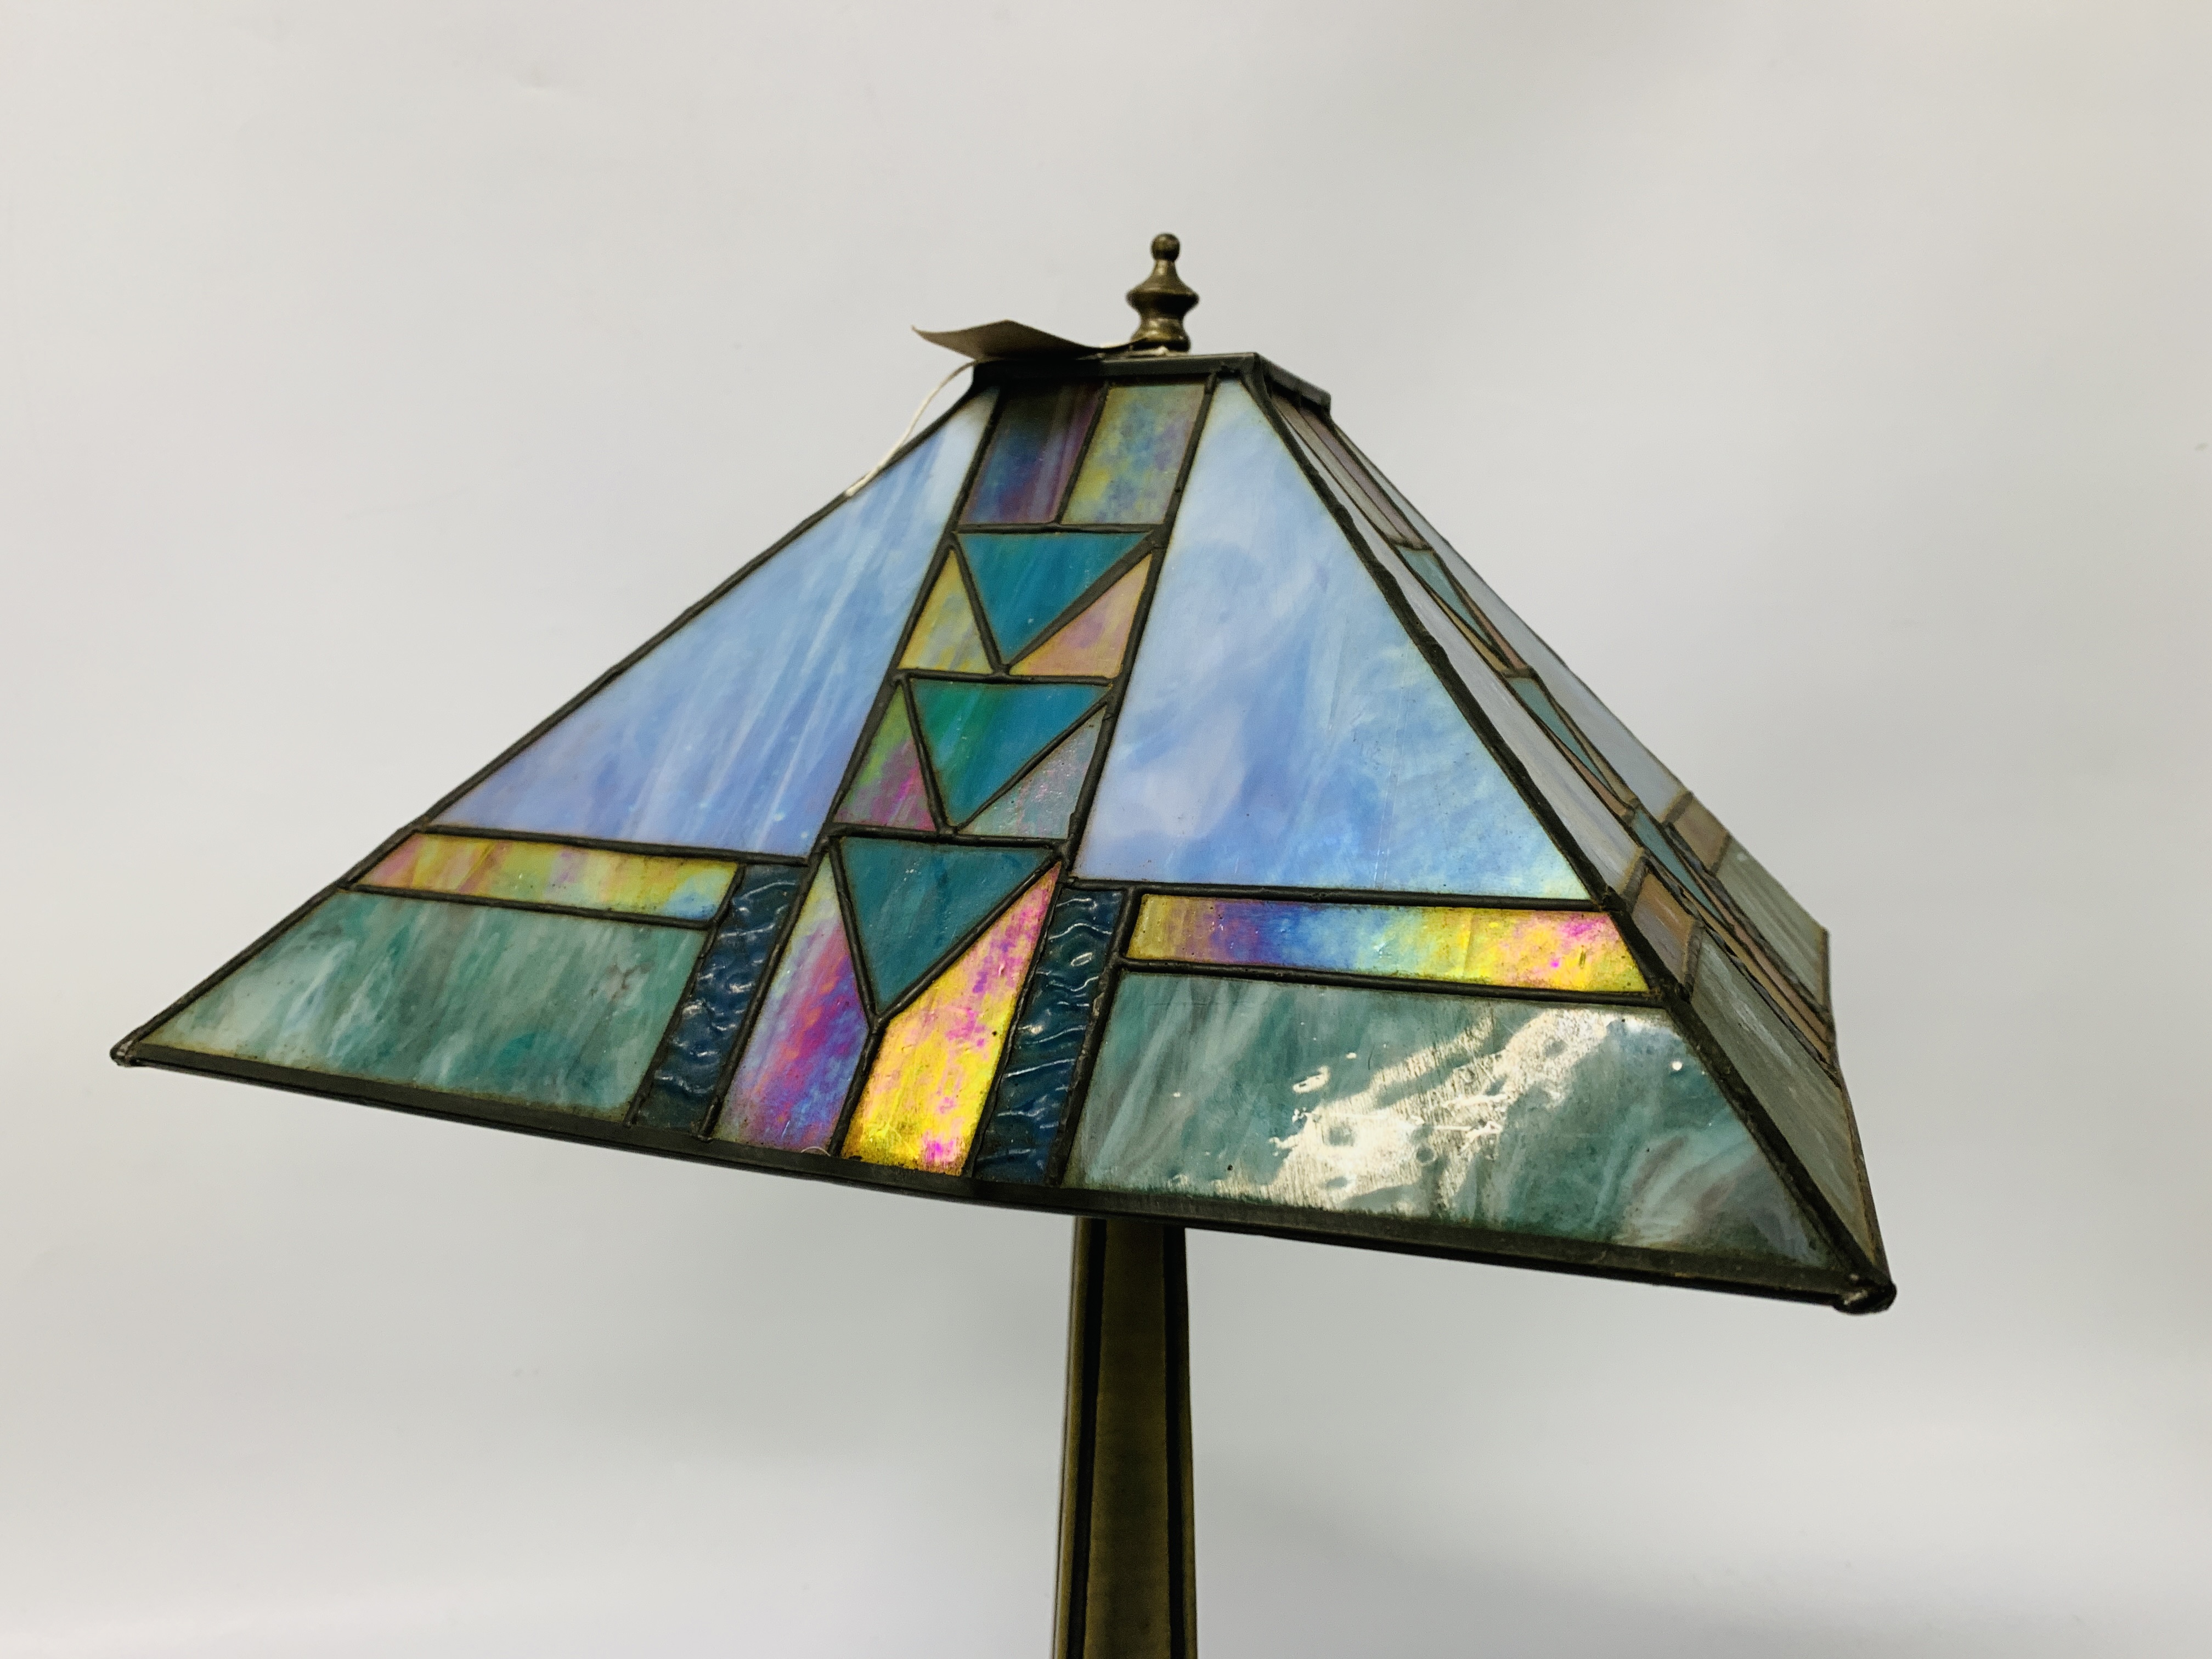 REPRODUCTION TIFFANY STYLE TABLE LAMP WITH SQUARE STAIN GLASS SHADE HEIGHT 50CM - SOLD AS SEEN. - Image 3 of 5